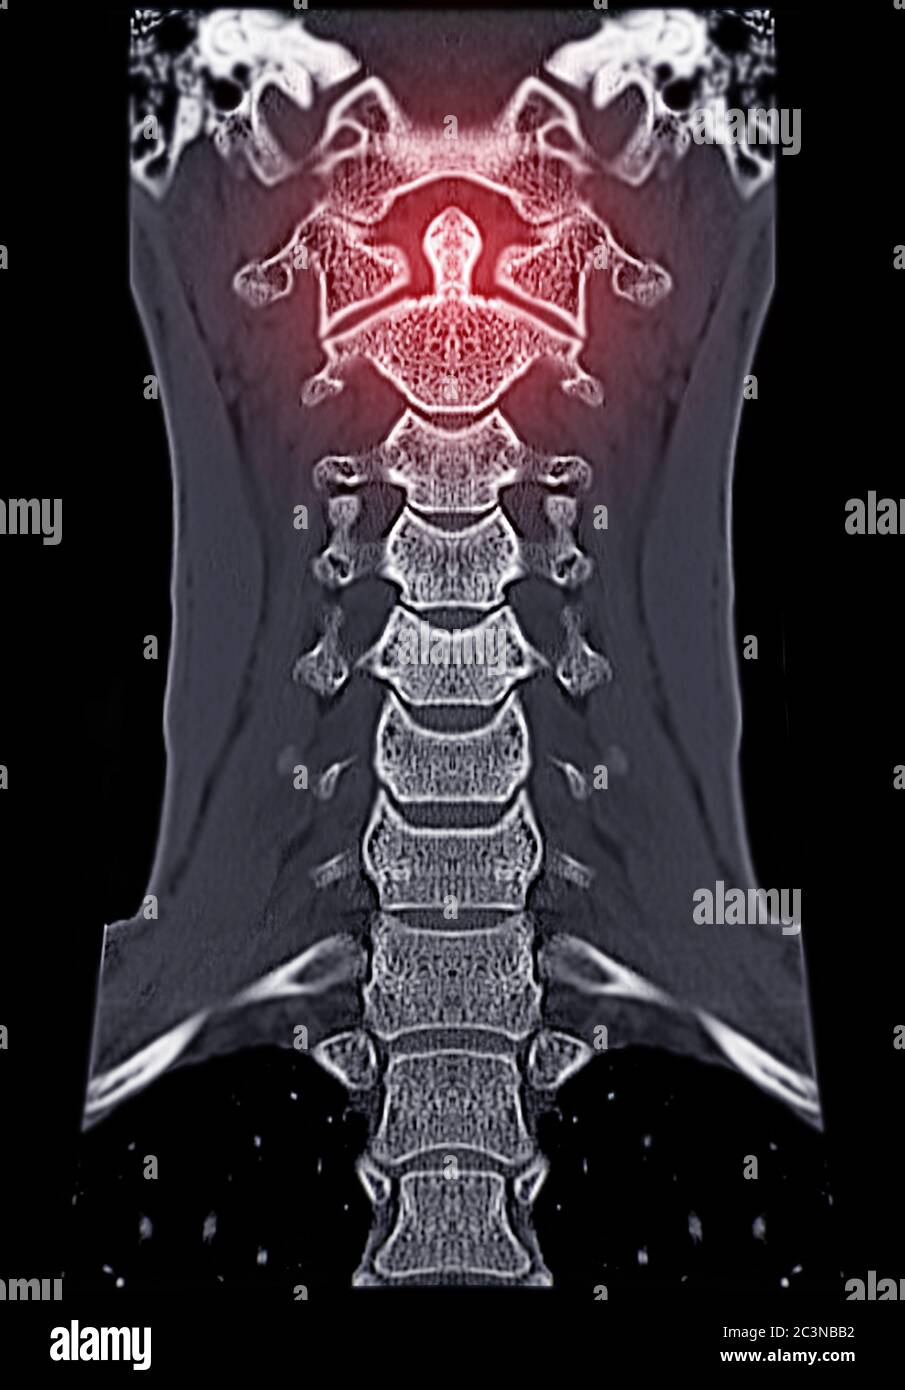 CT C-Spine or Cervical spine  Coronal view in patient trauma cervical spine injury showing odontoid process or dens. Stock Photo